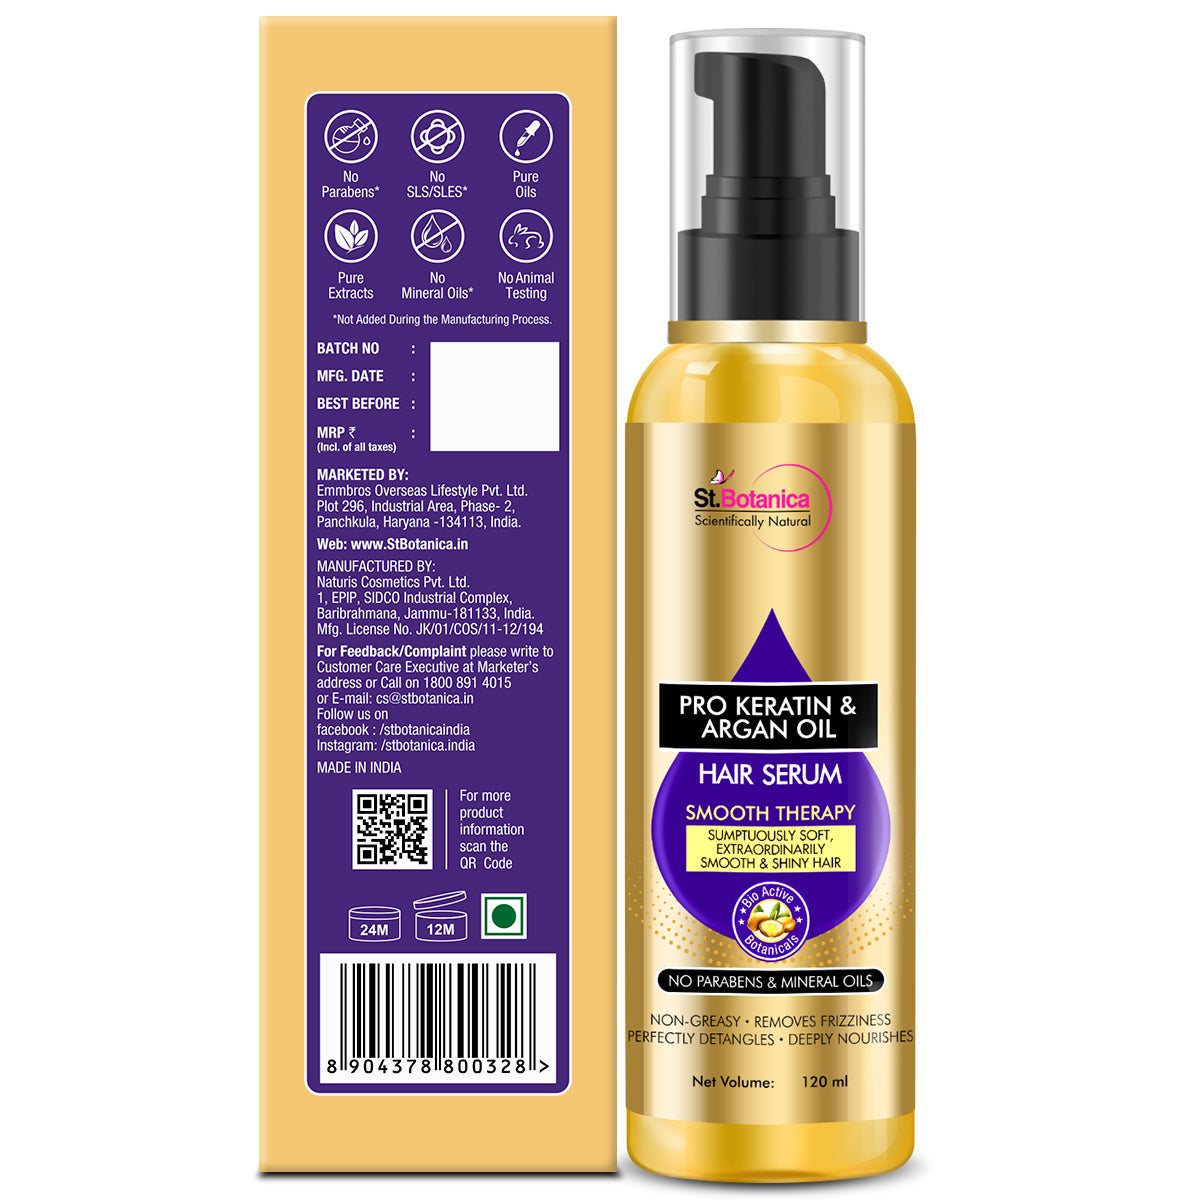 St.Botanica Pro Keratin & Argan Oil Smooth Therapy Hair Serum - For Soft, Smooth & Shiny Hair, 120ml